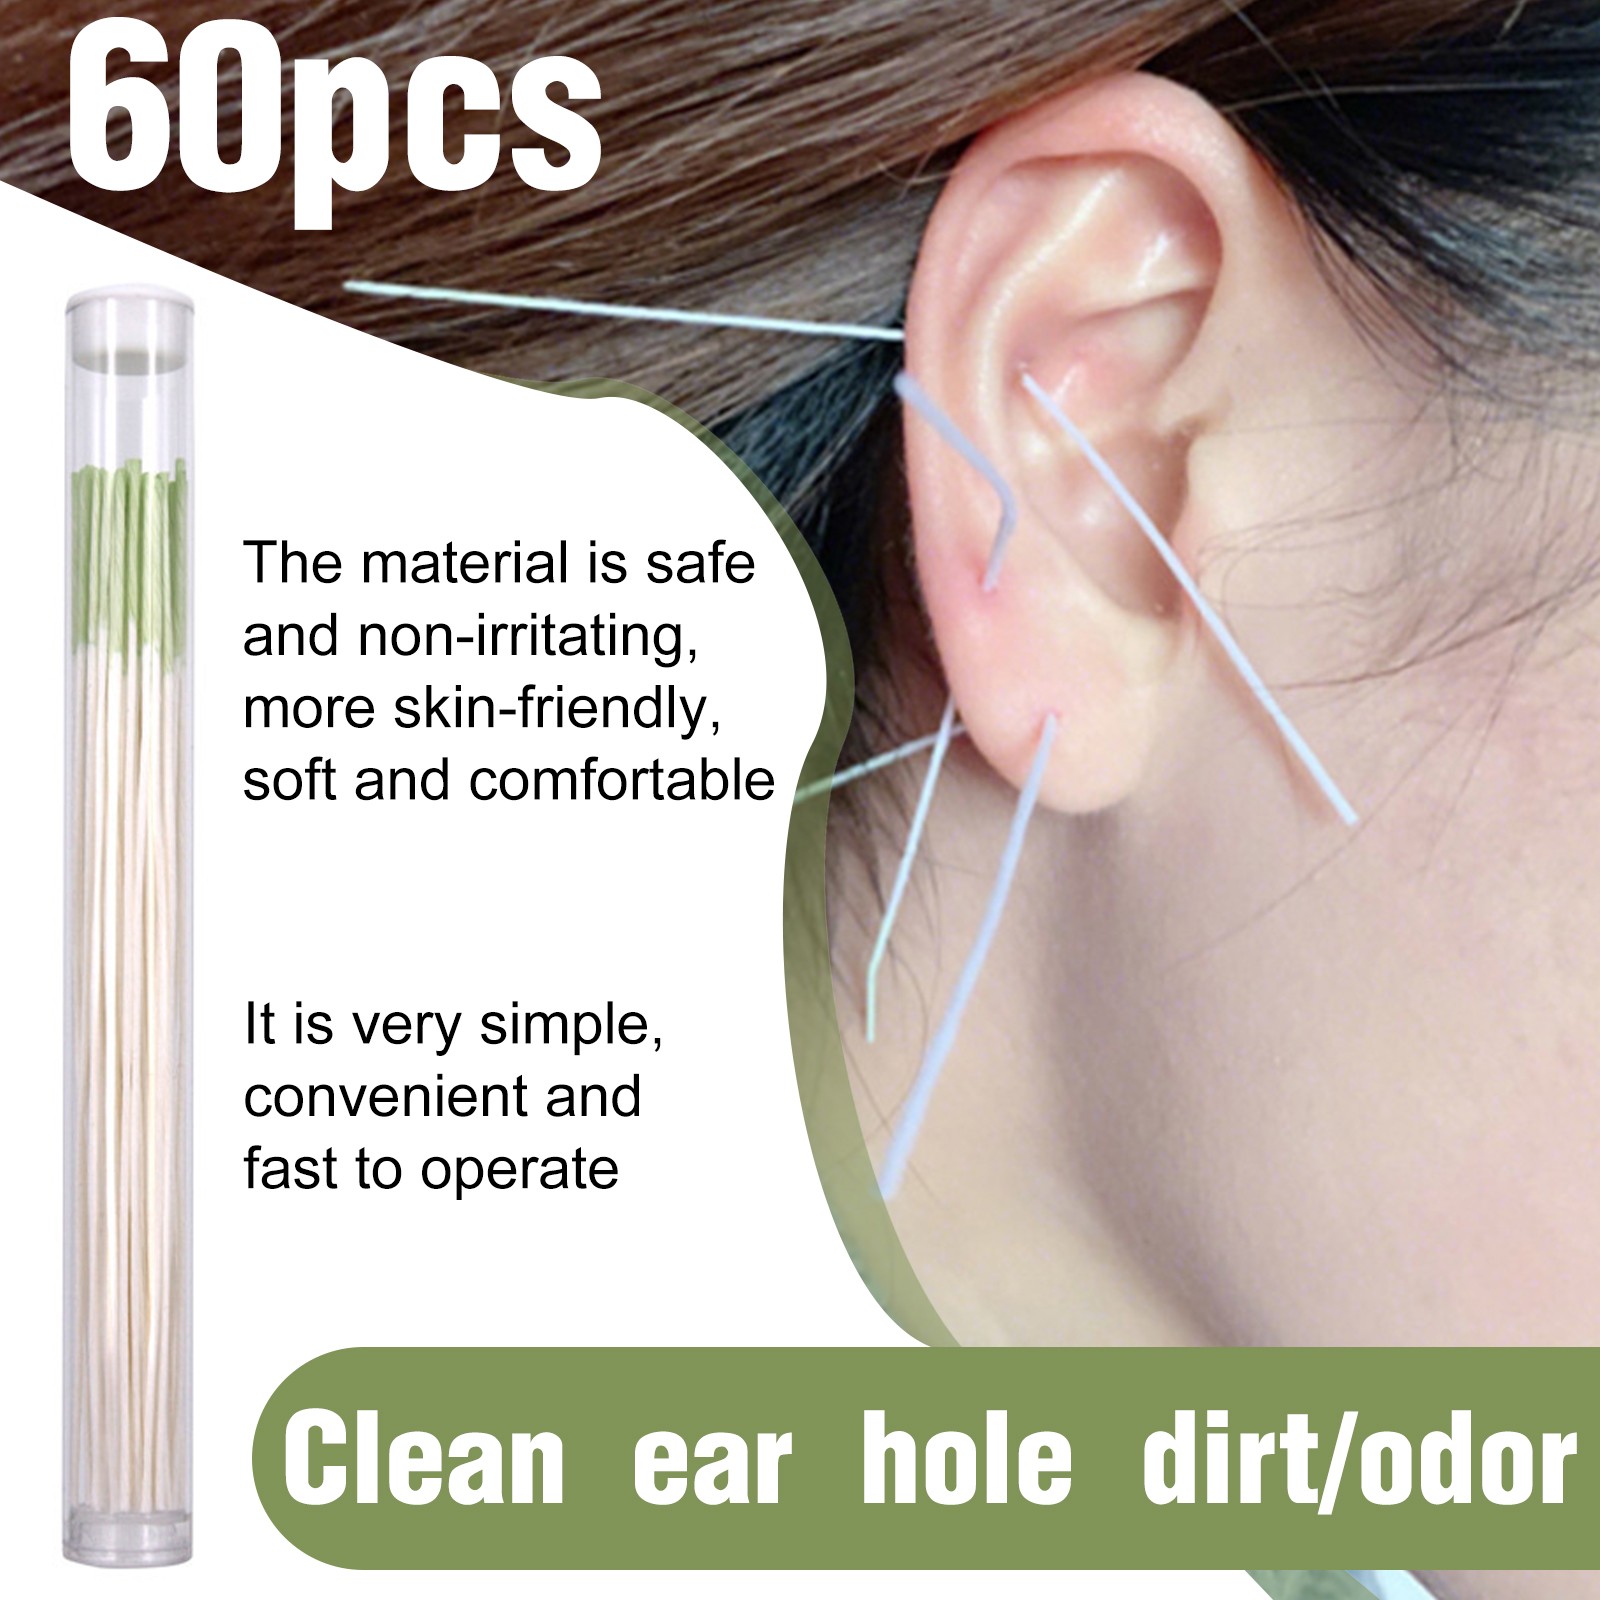 60pcs Pierced Ear Cleaning Kit Herb Solution Paper Floss Ear Piercing Aftercare Tools Earrings Set Disposable Piercing Cleaner